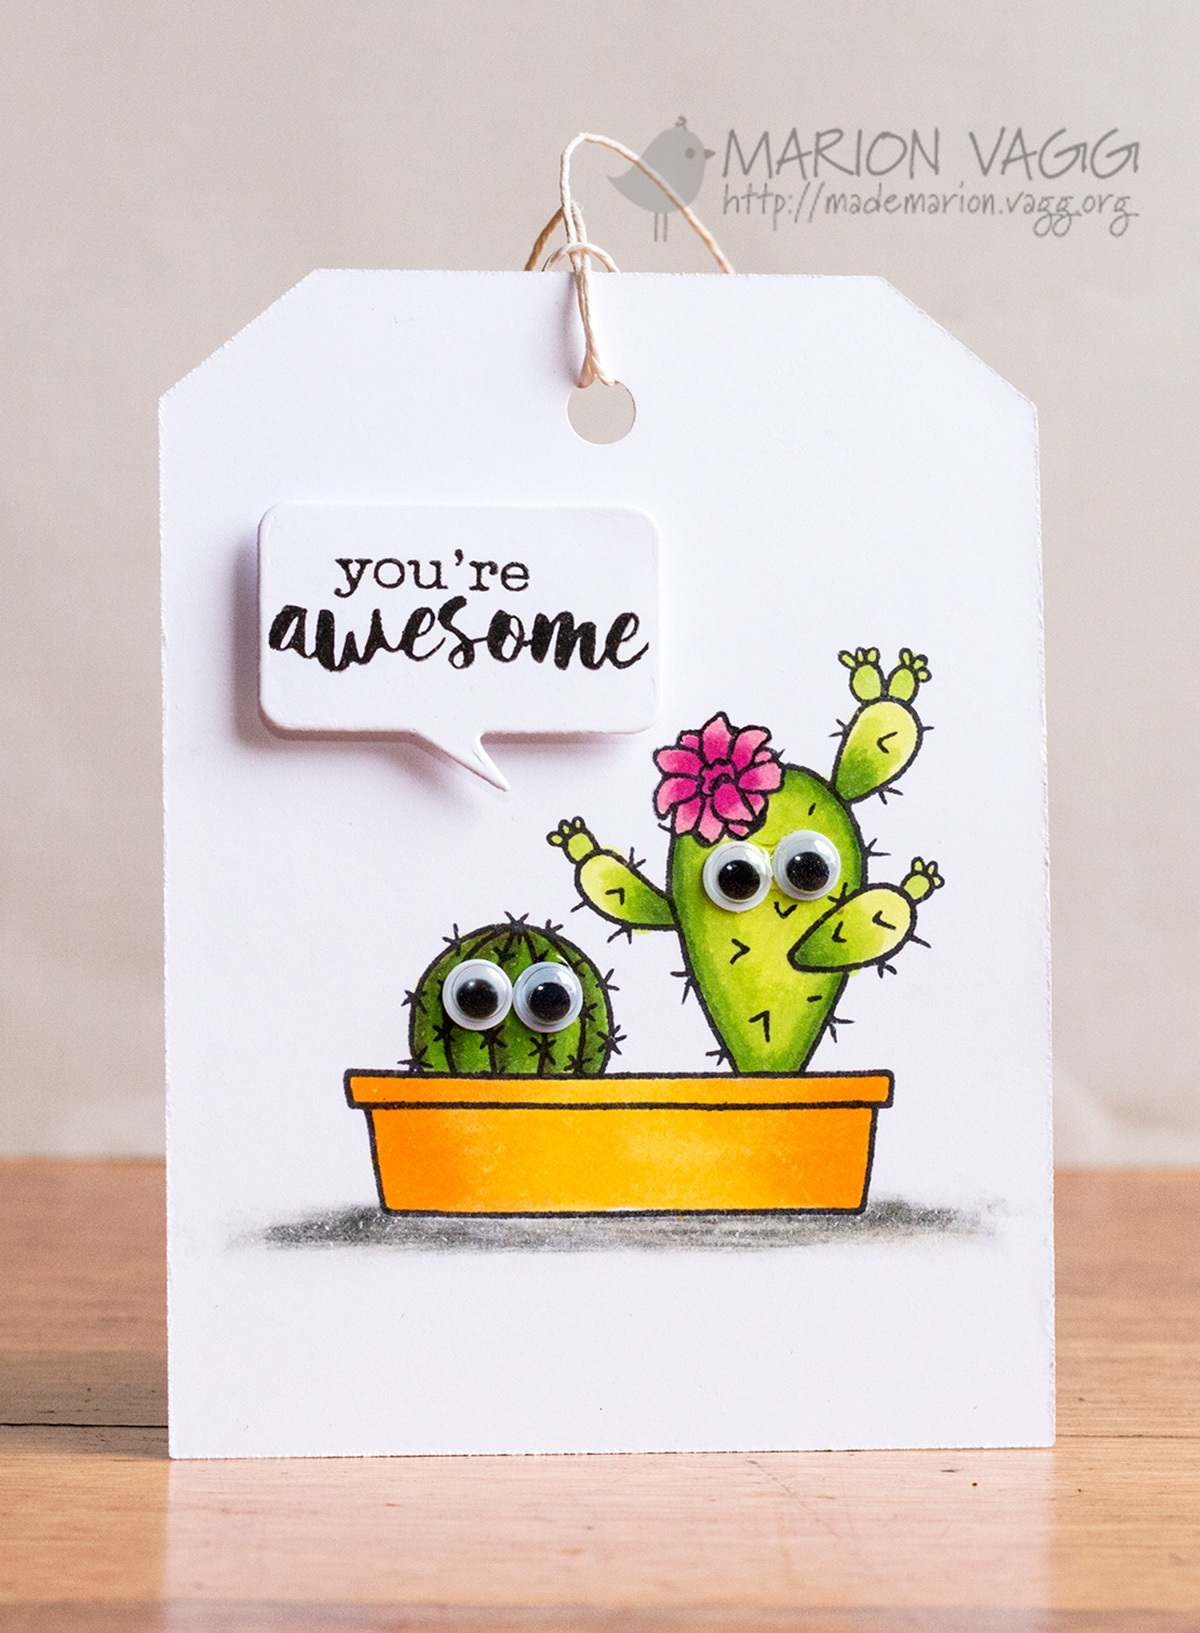 You're awesome - Jane's Doodles | Marion Vagg